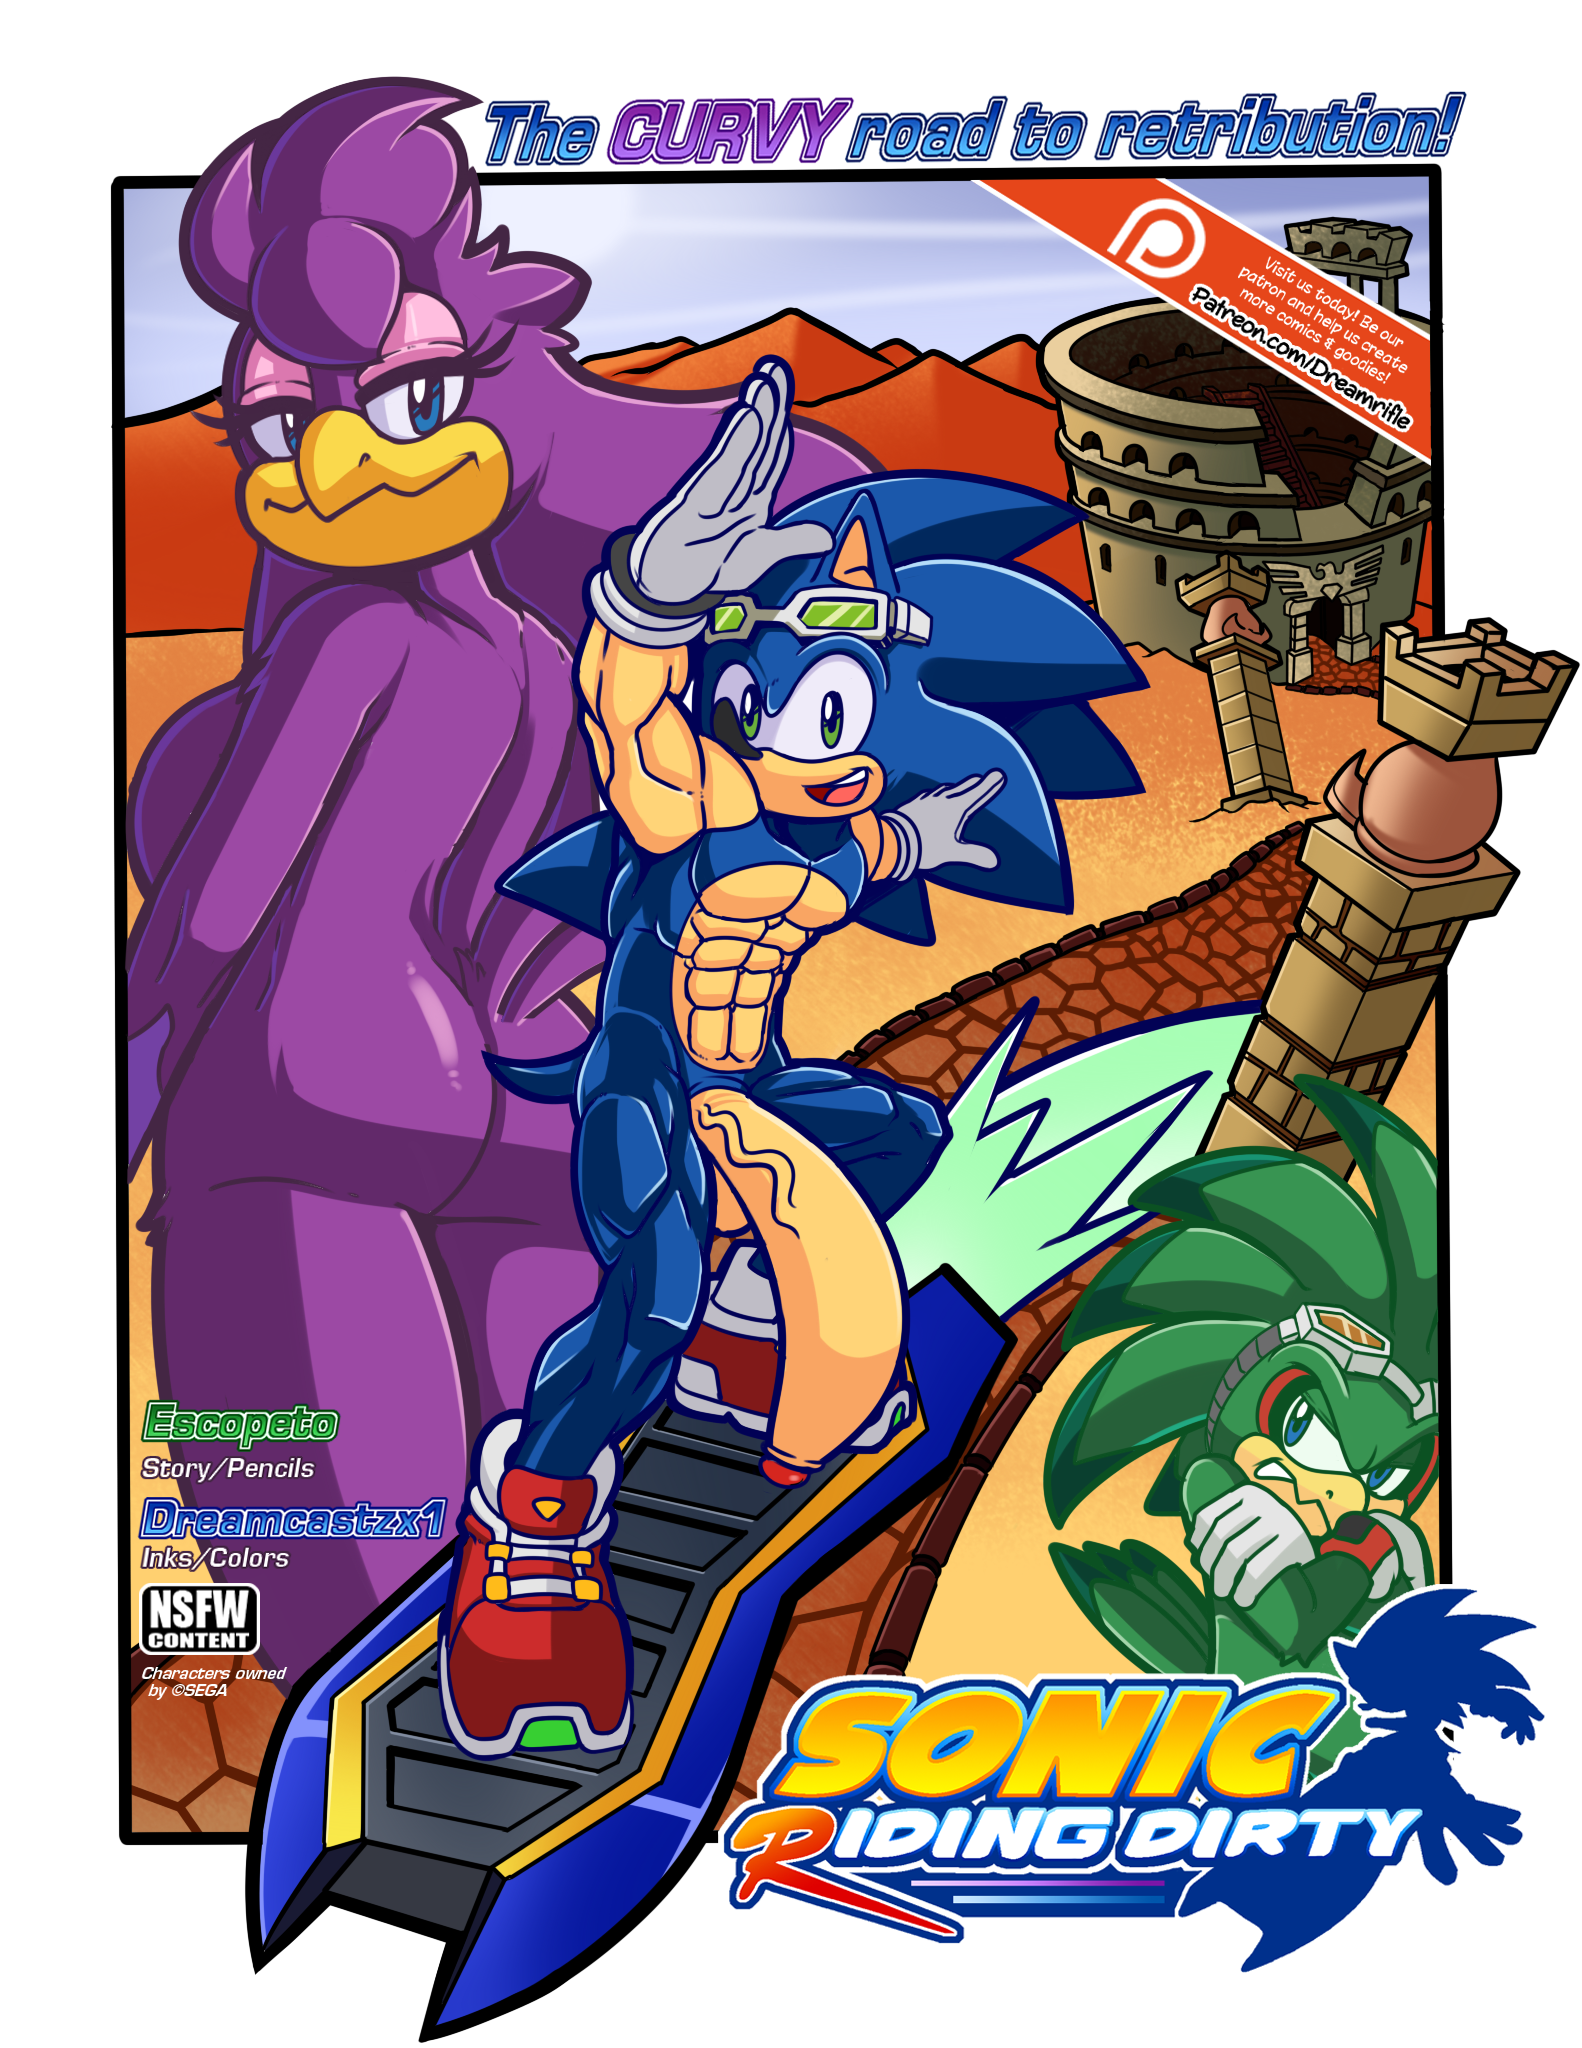 Sonic the hedgehog wave the swallow porn comic